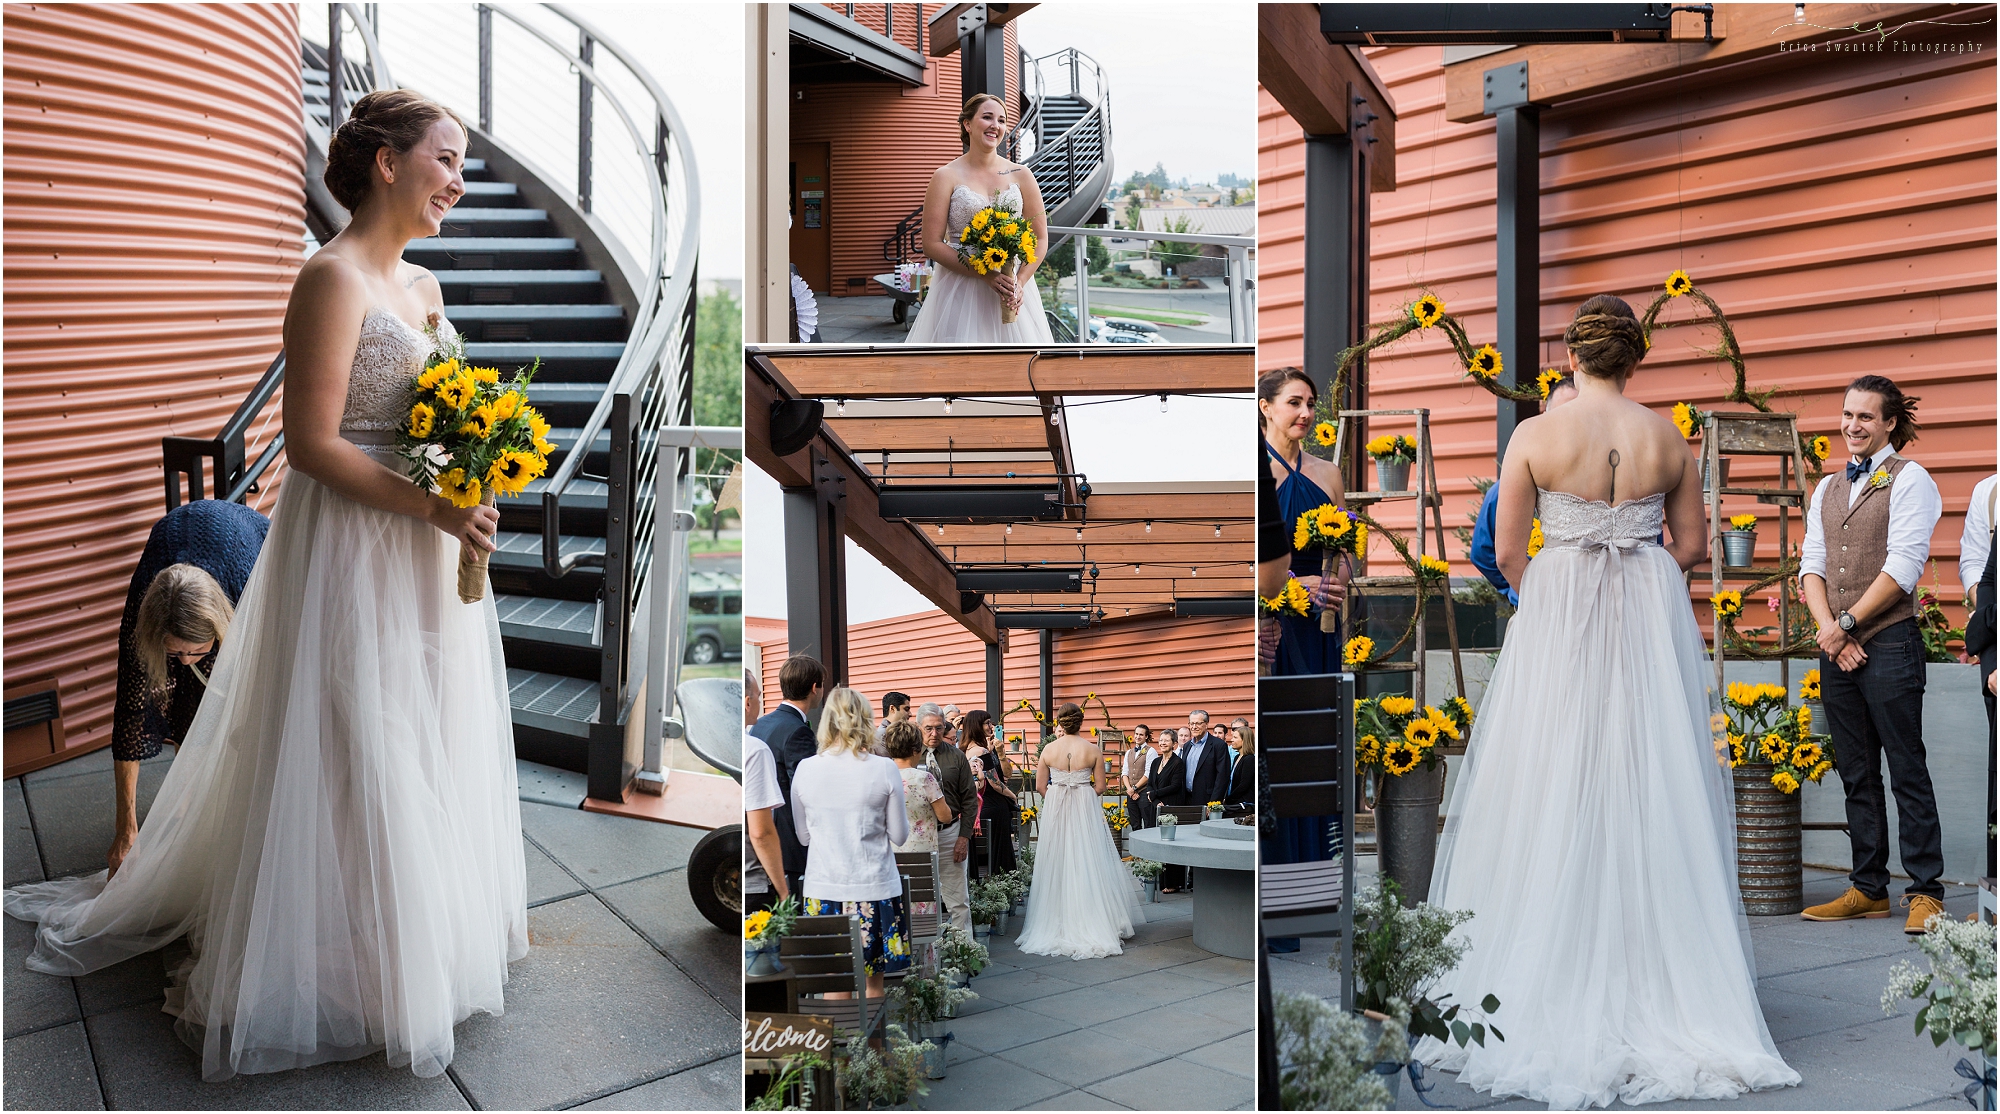 A gorgeous bride wearing an ivory gown, Della by Wtoo, walks down the aisle in the Sky Bar at her Worthy Brewing Wedding in Bend Oregon as her groom waits for her by the sunflower adorned alter. | Erica Swantek Photography